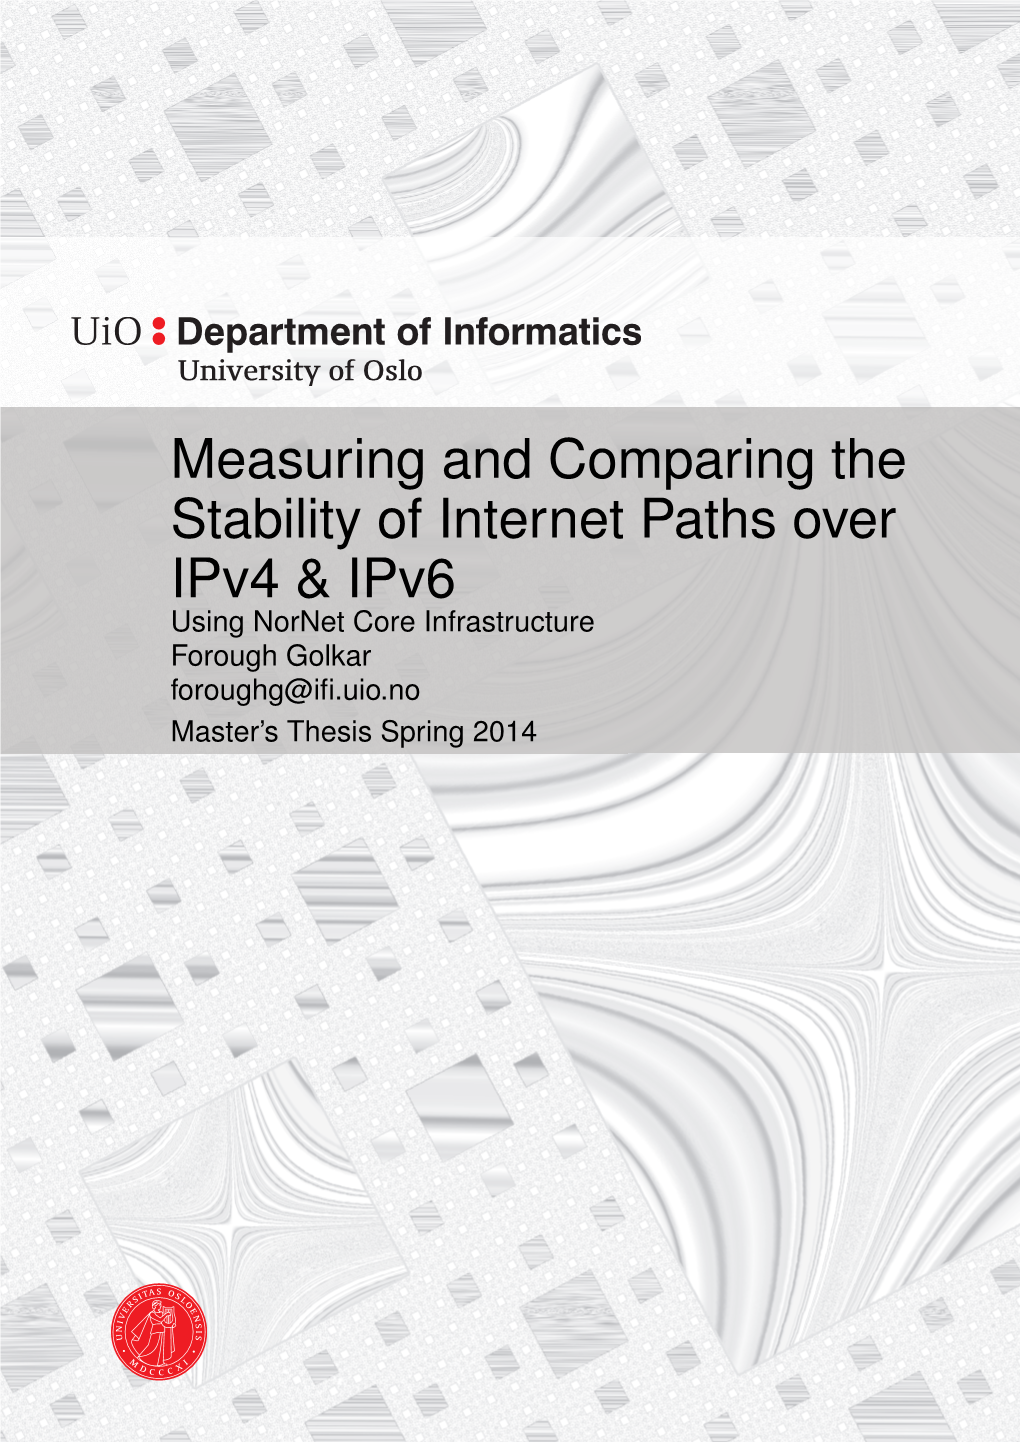 Measuring and Comparing the Stability of Internet Paths Over Ipv4